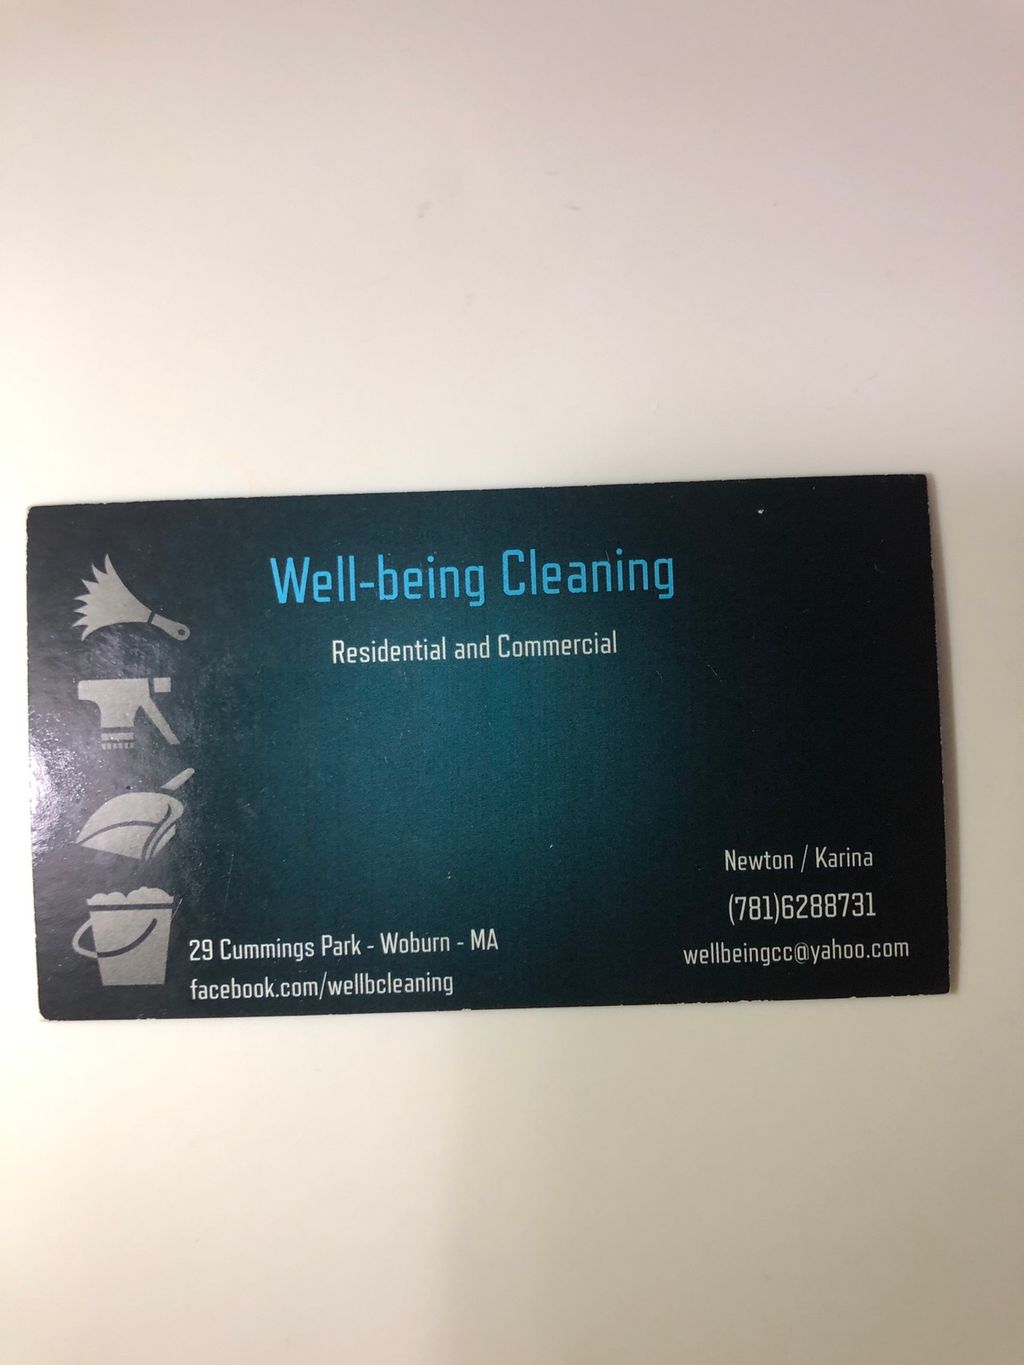 Wellbeing Cleaning